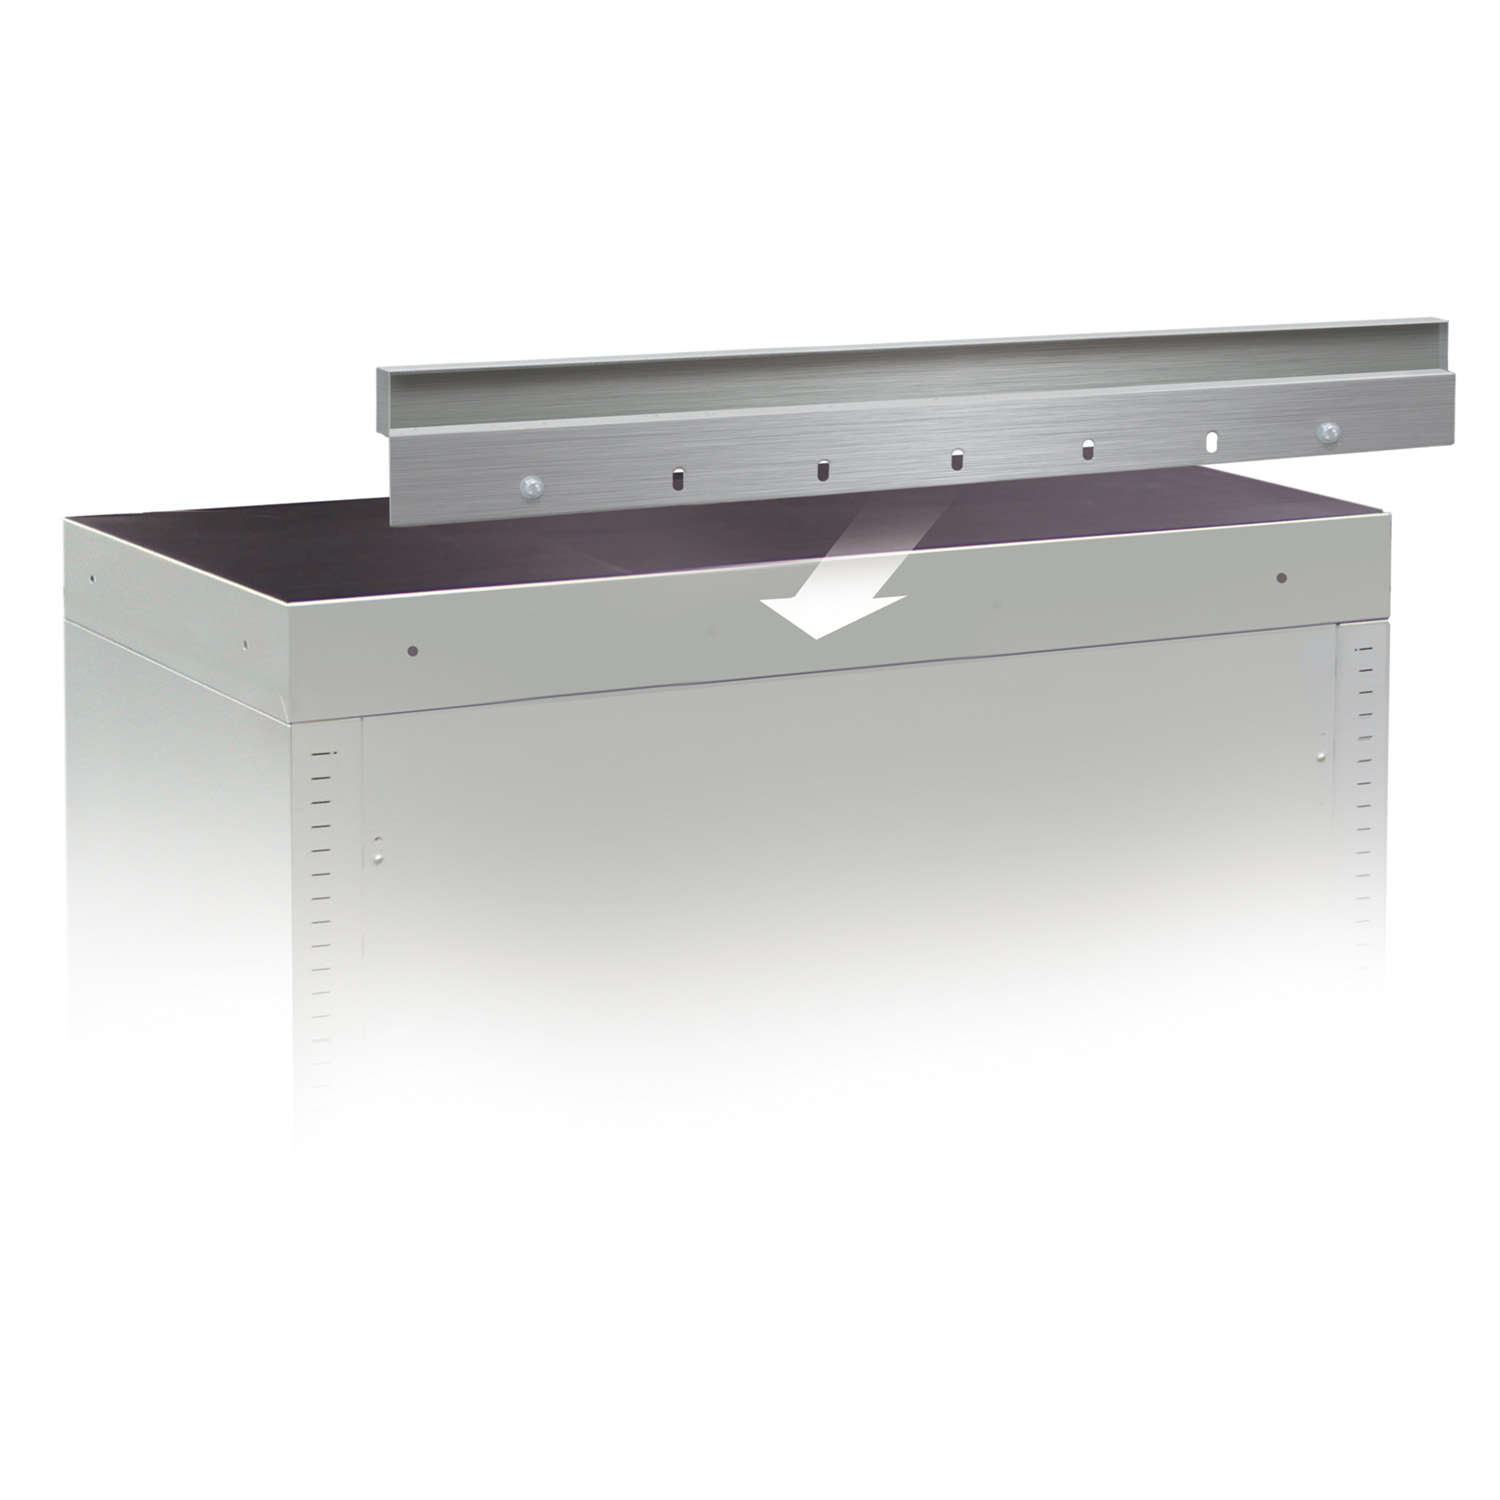 Stainless steel up-stand (50mm x 900mm)